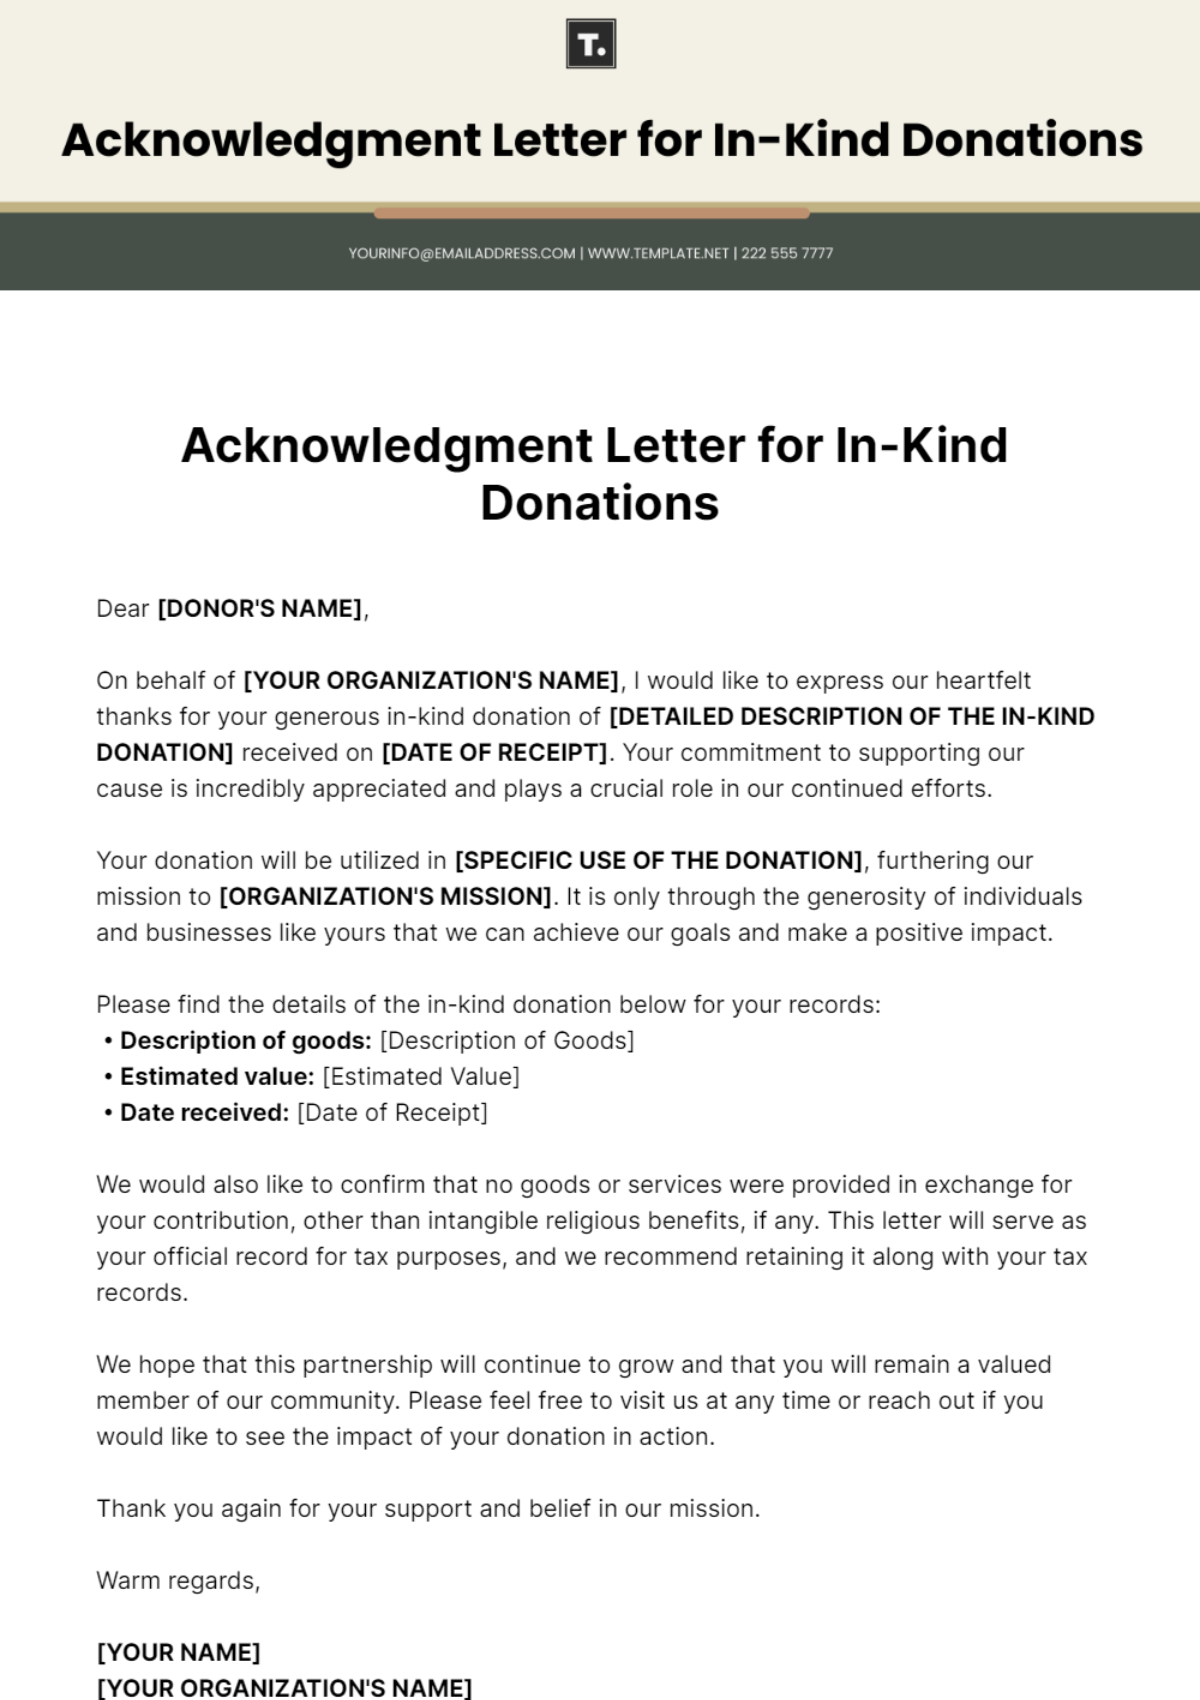 Acknowledgment Letter For In-Kind Donations Template